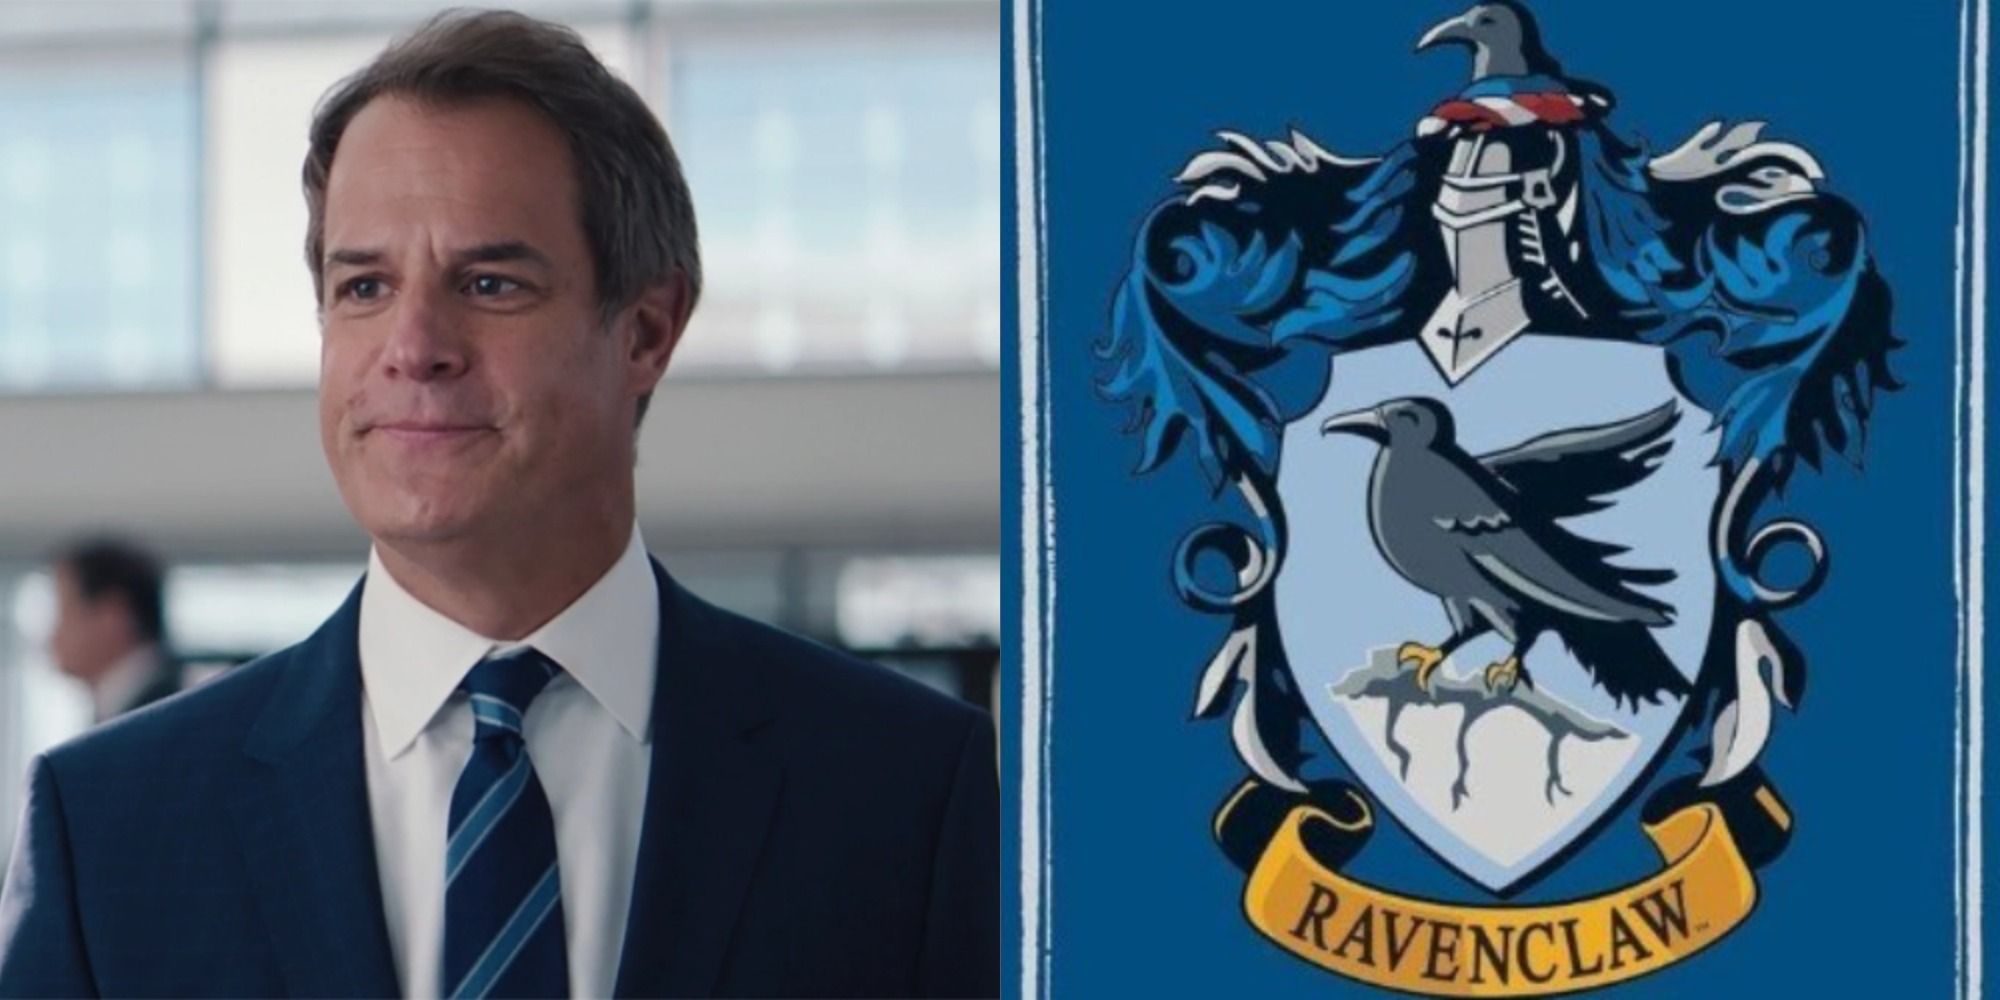 A split image of Tyler Hayward smiling and the Ravenclaw logo